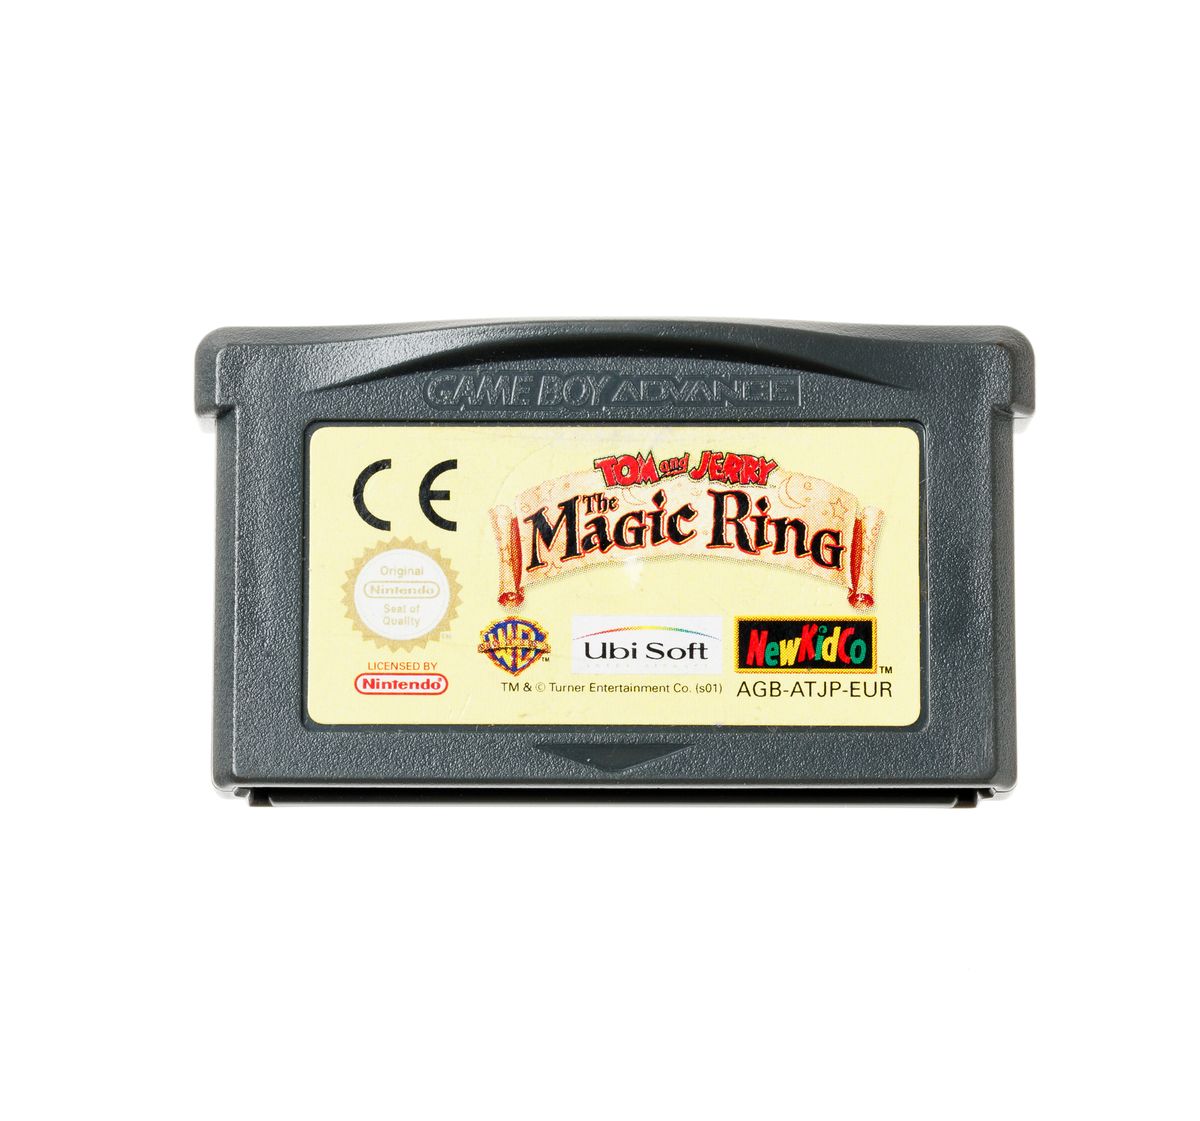 Tom and Jerry: The Magical Ring - Gameboy Advance Games